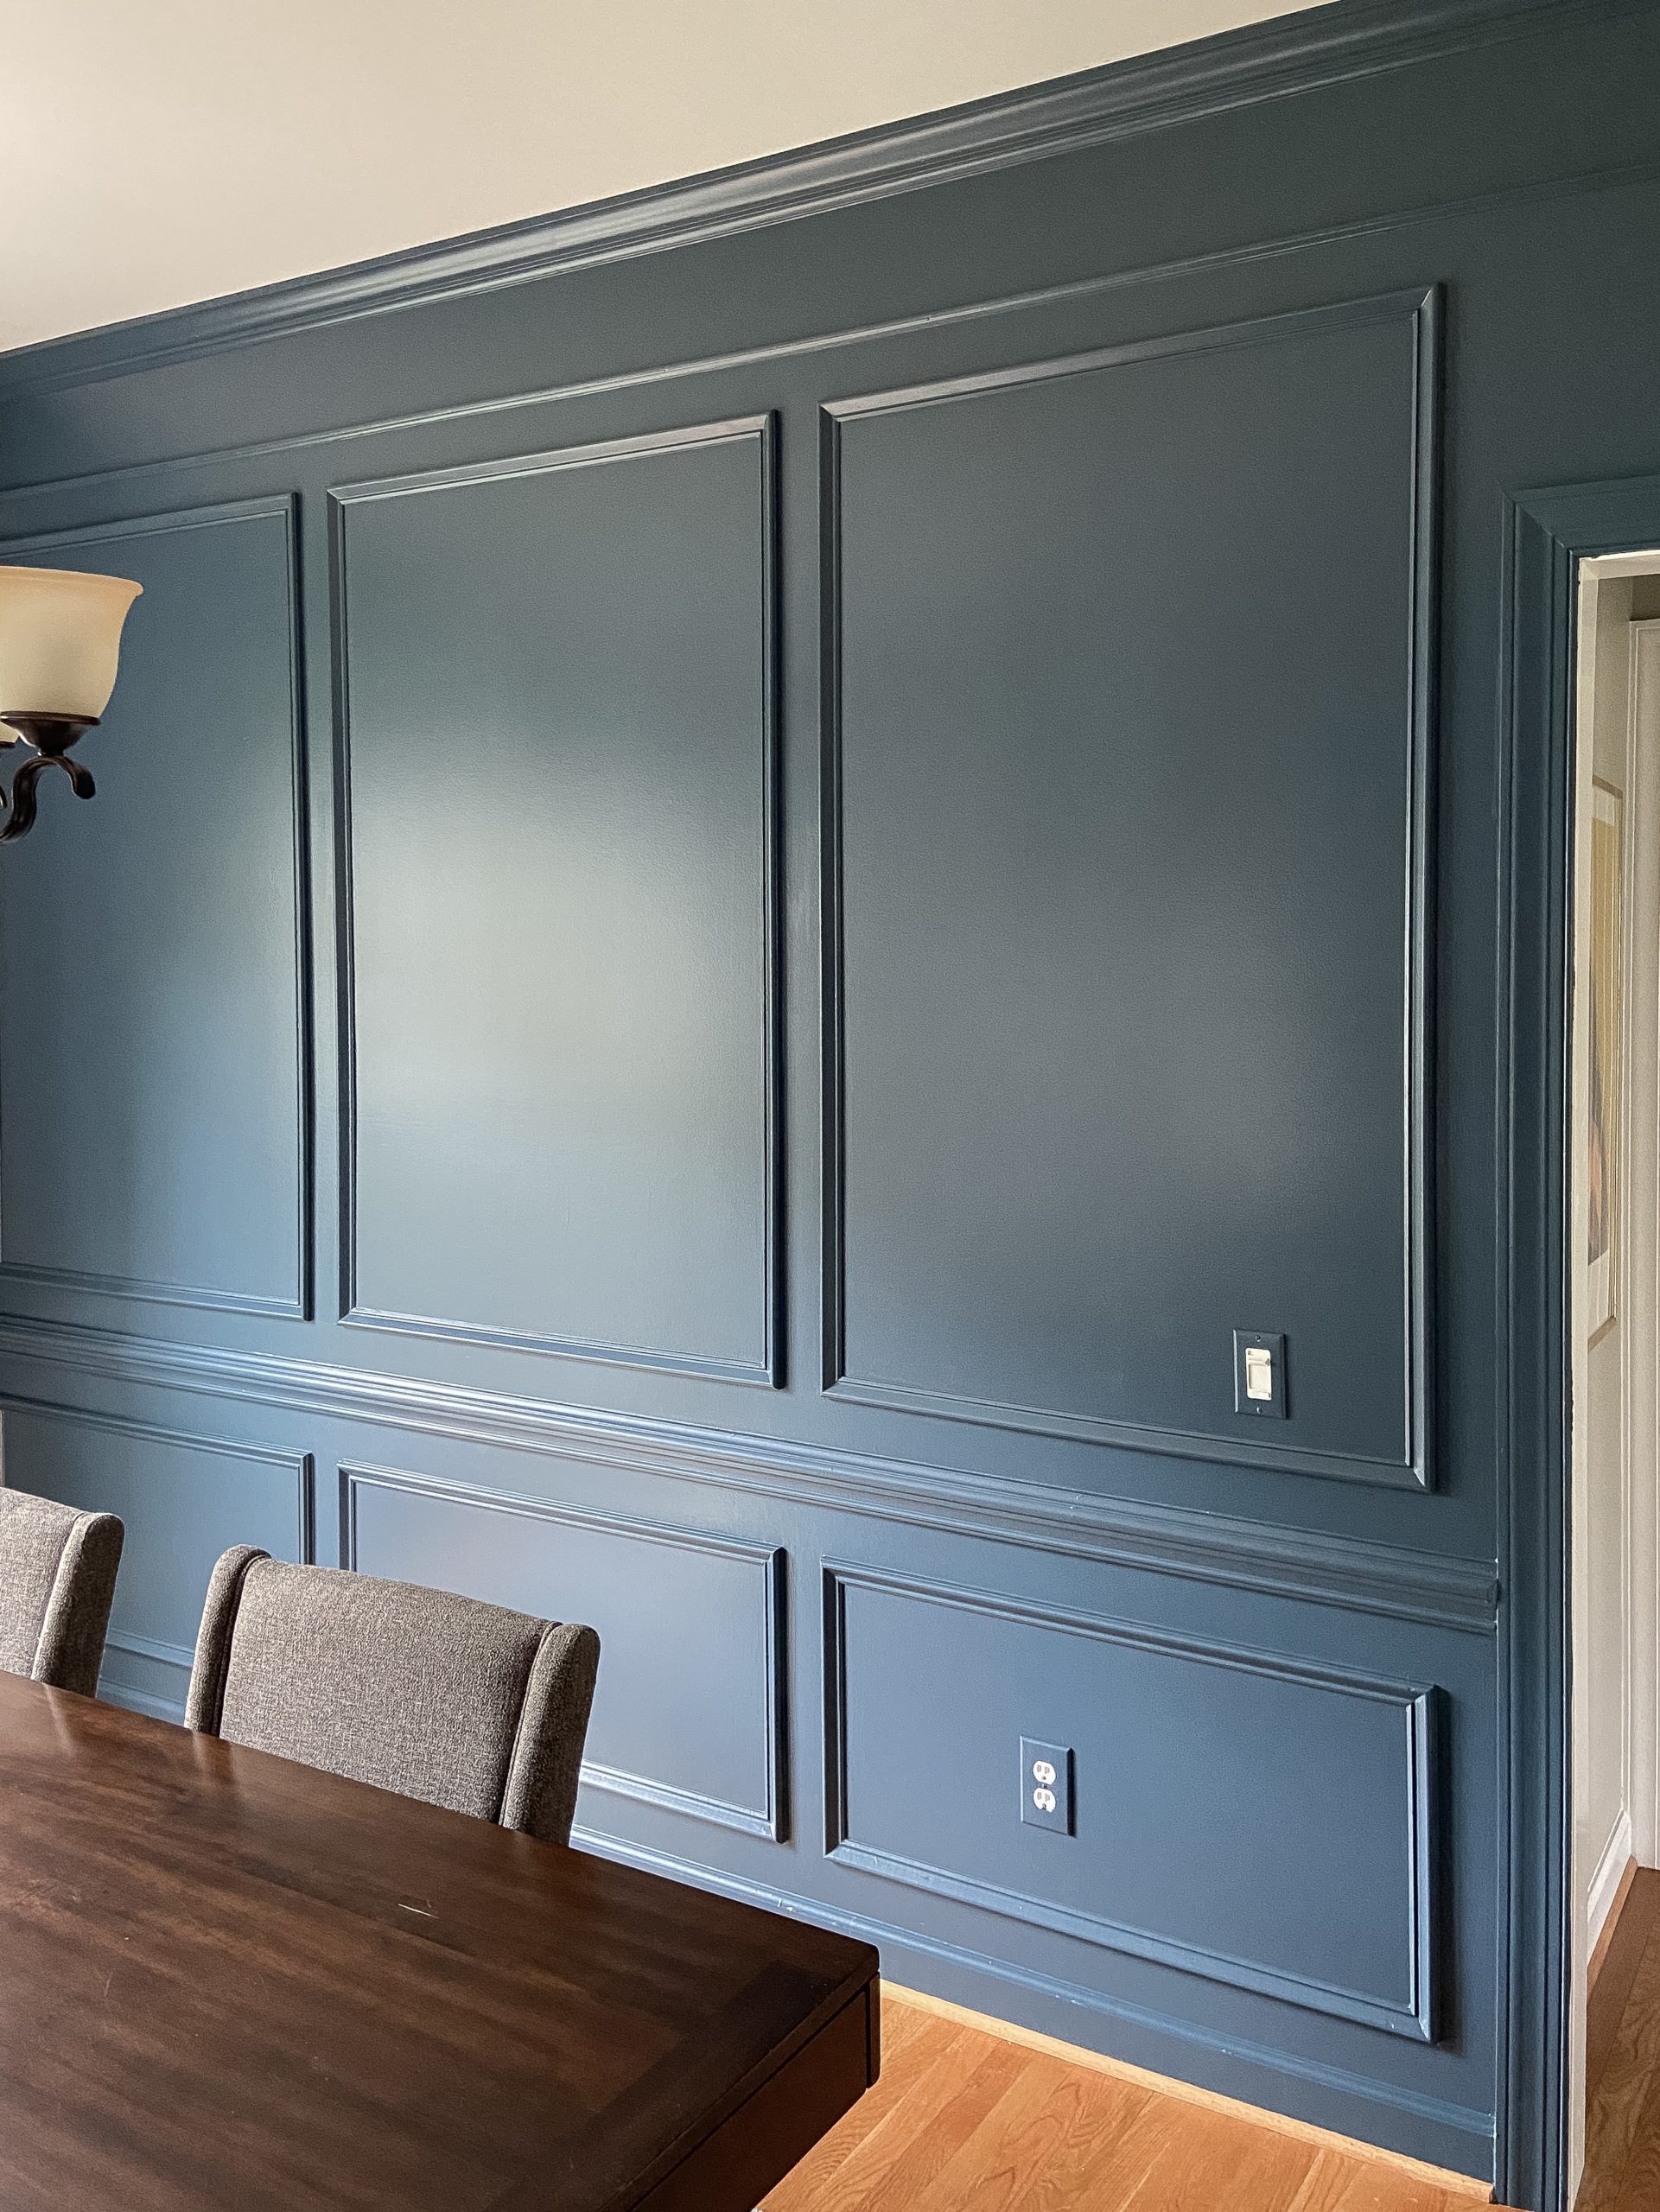 Transitional Picture Frame Molding in a Dining Room in a deep teal blue paint.